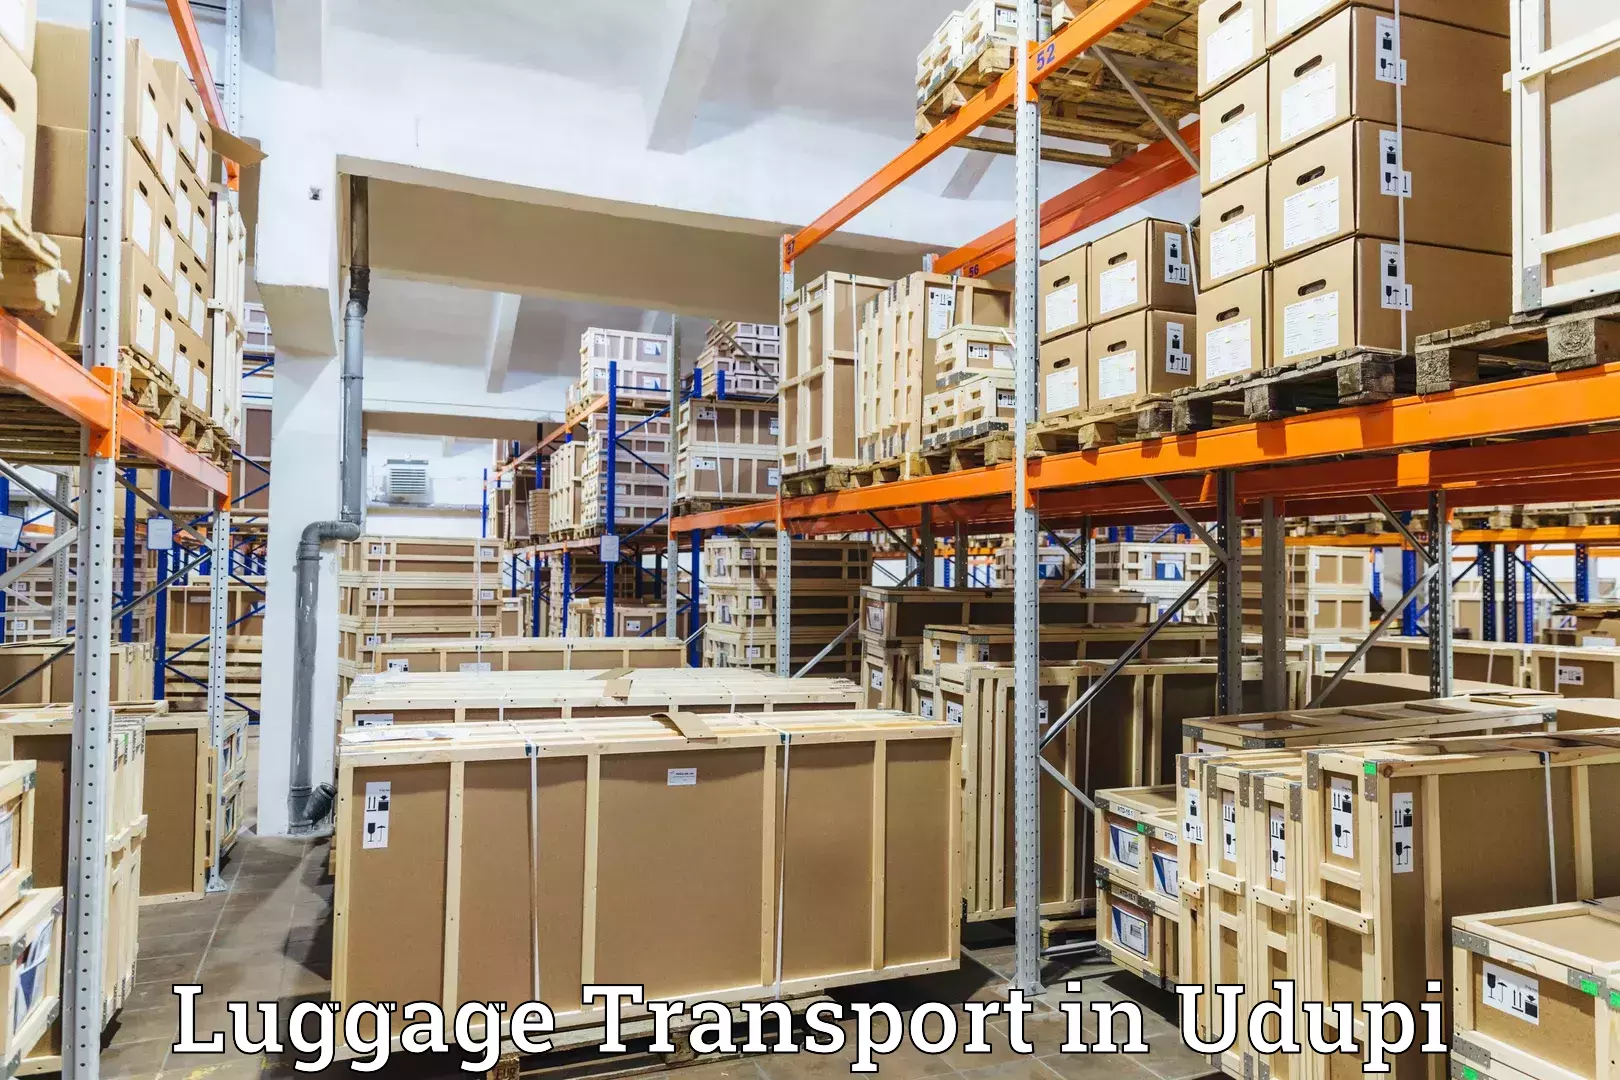 Instant baggage transport quote in Udupi